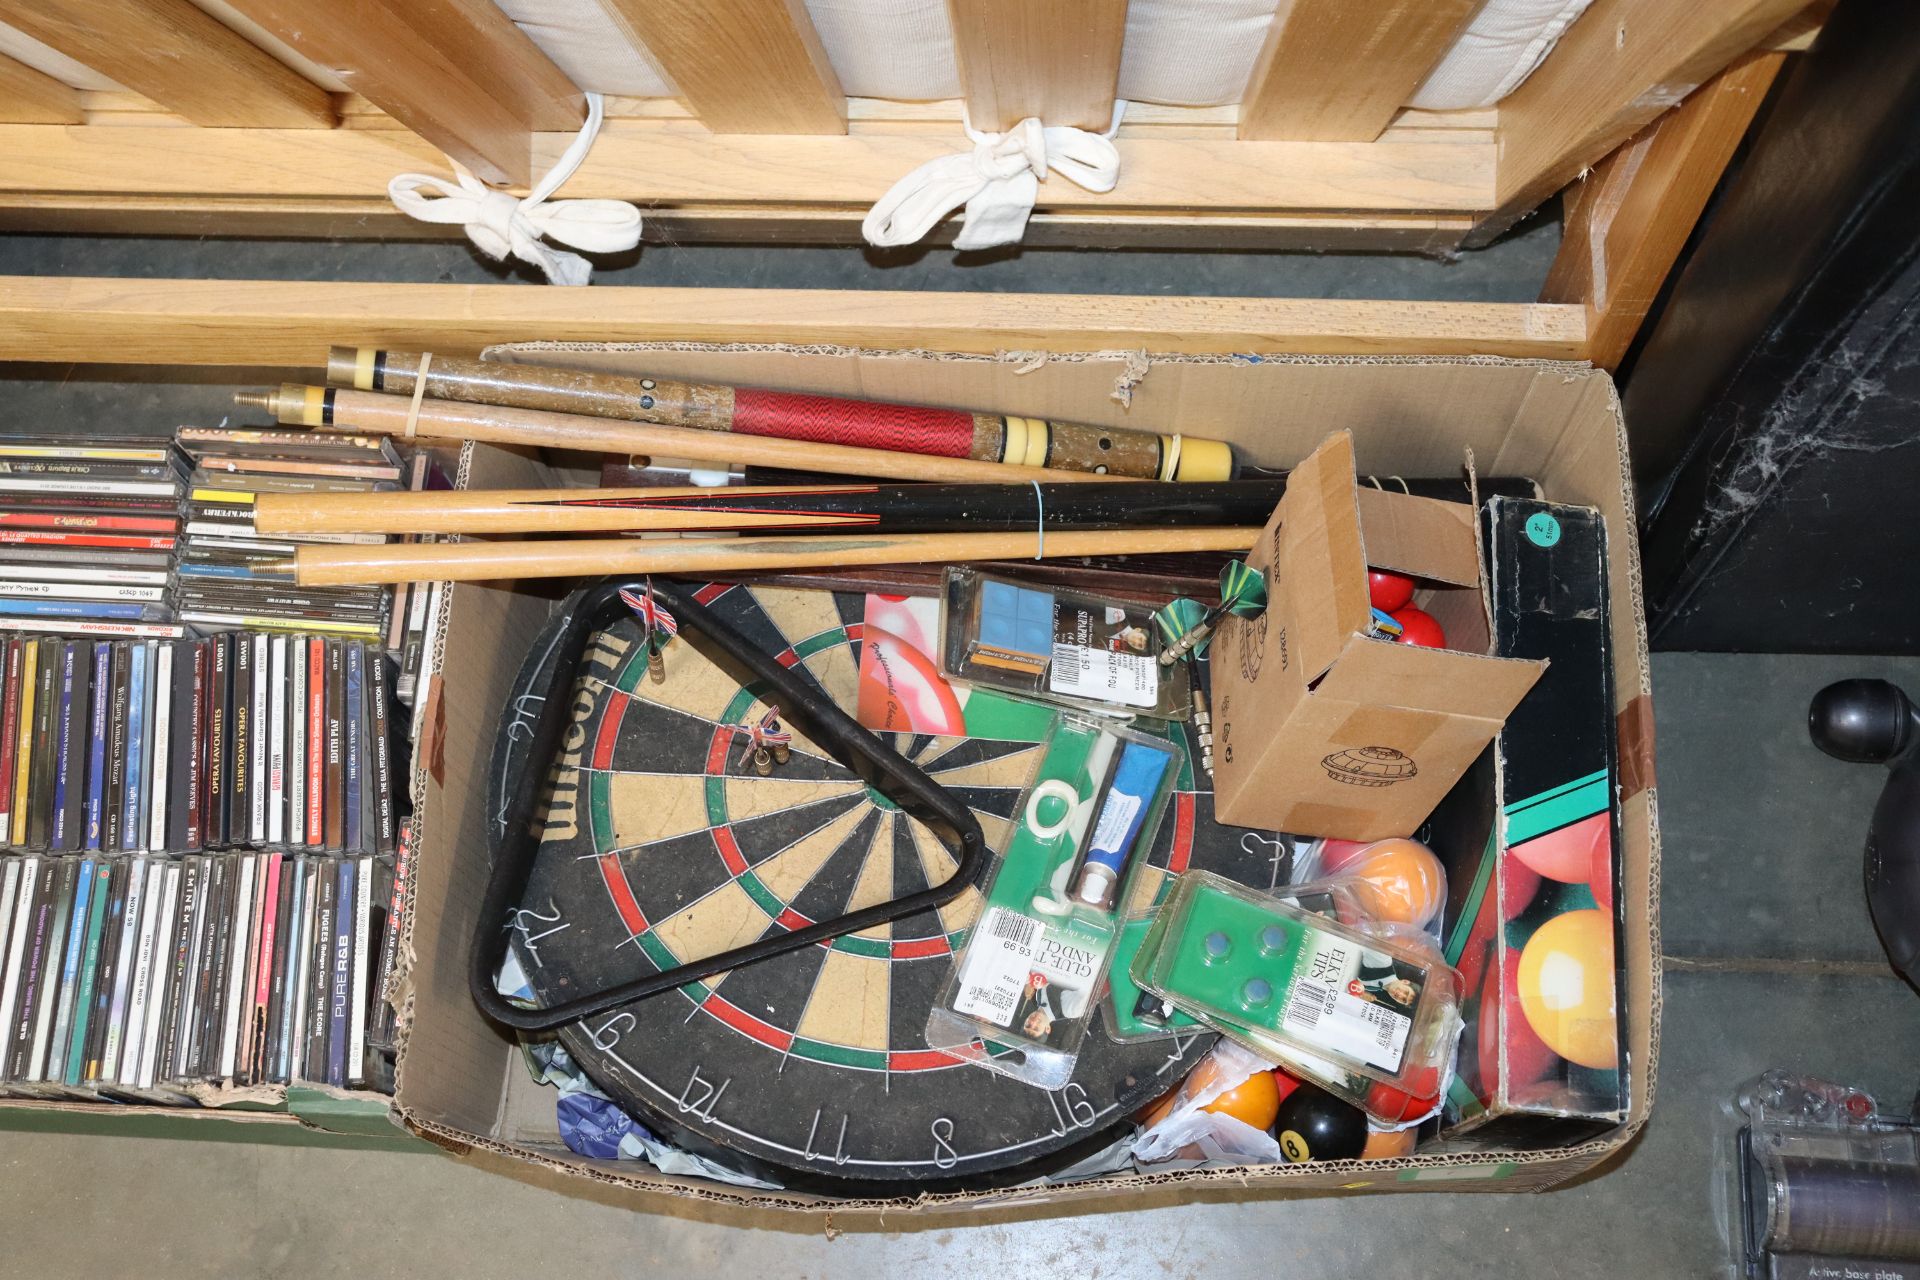 A box containing pool cues, dart boards, darts, sn